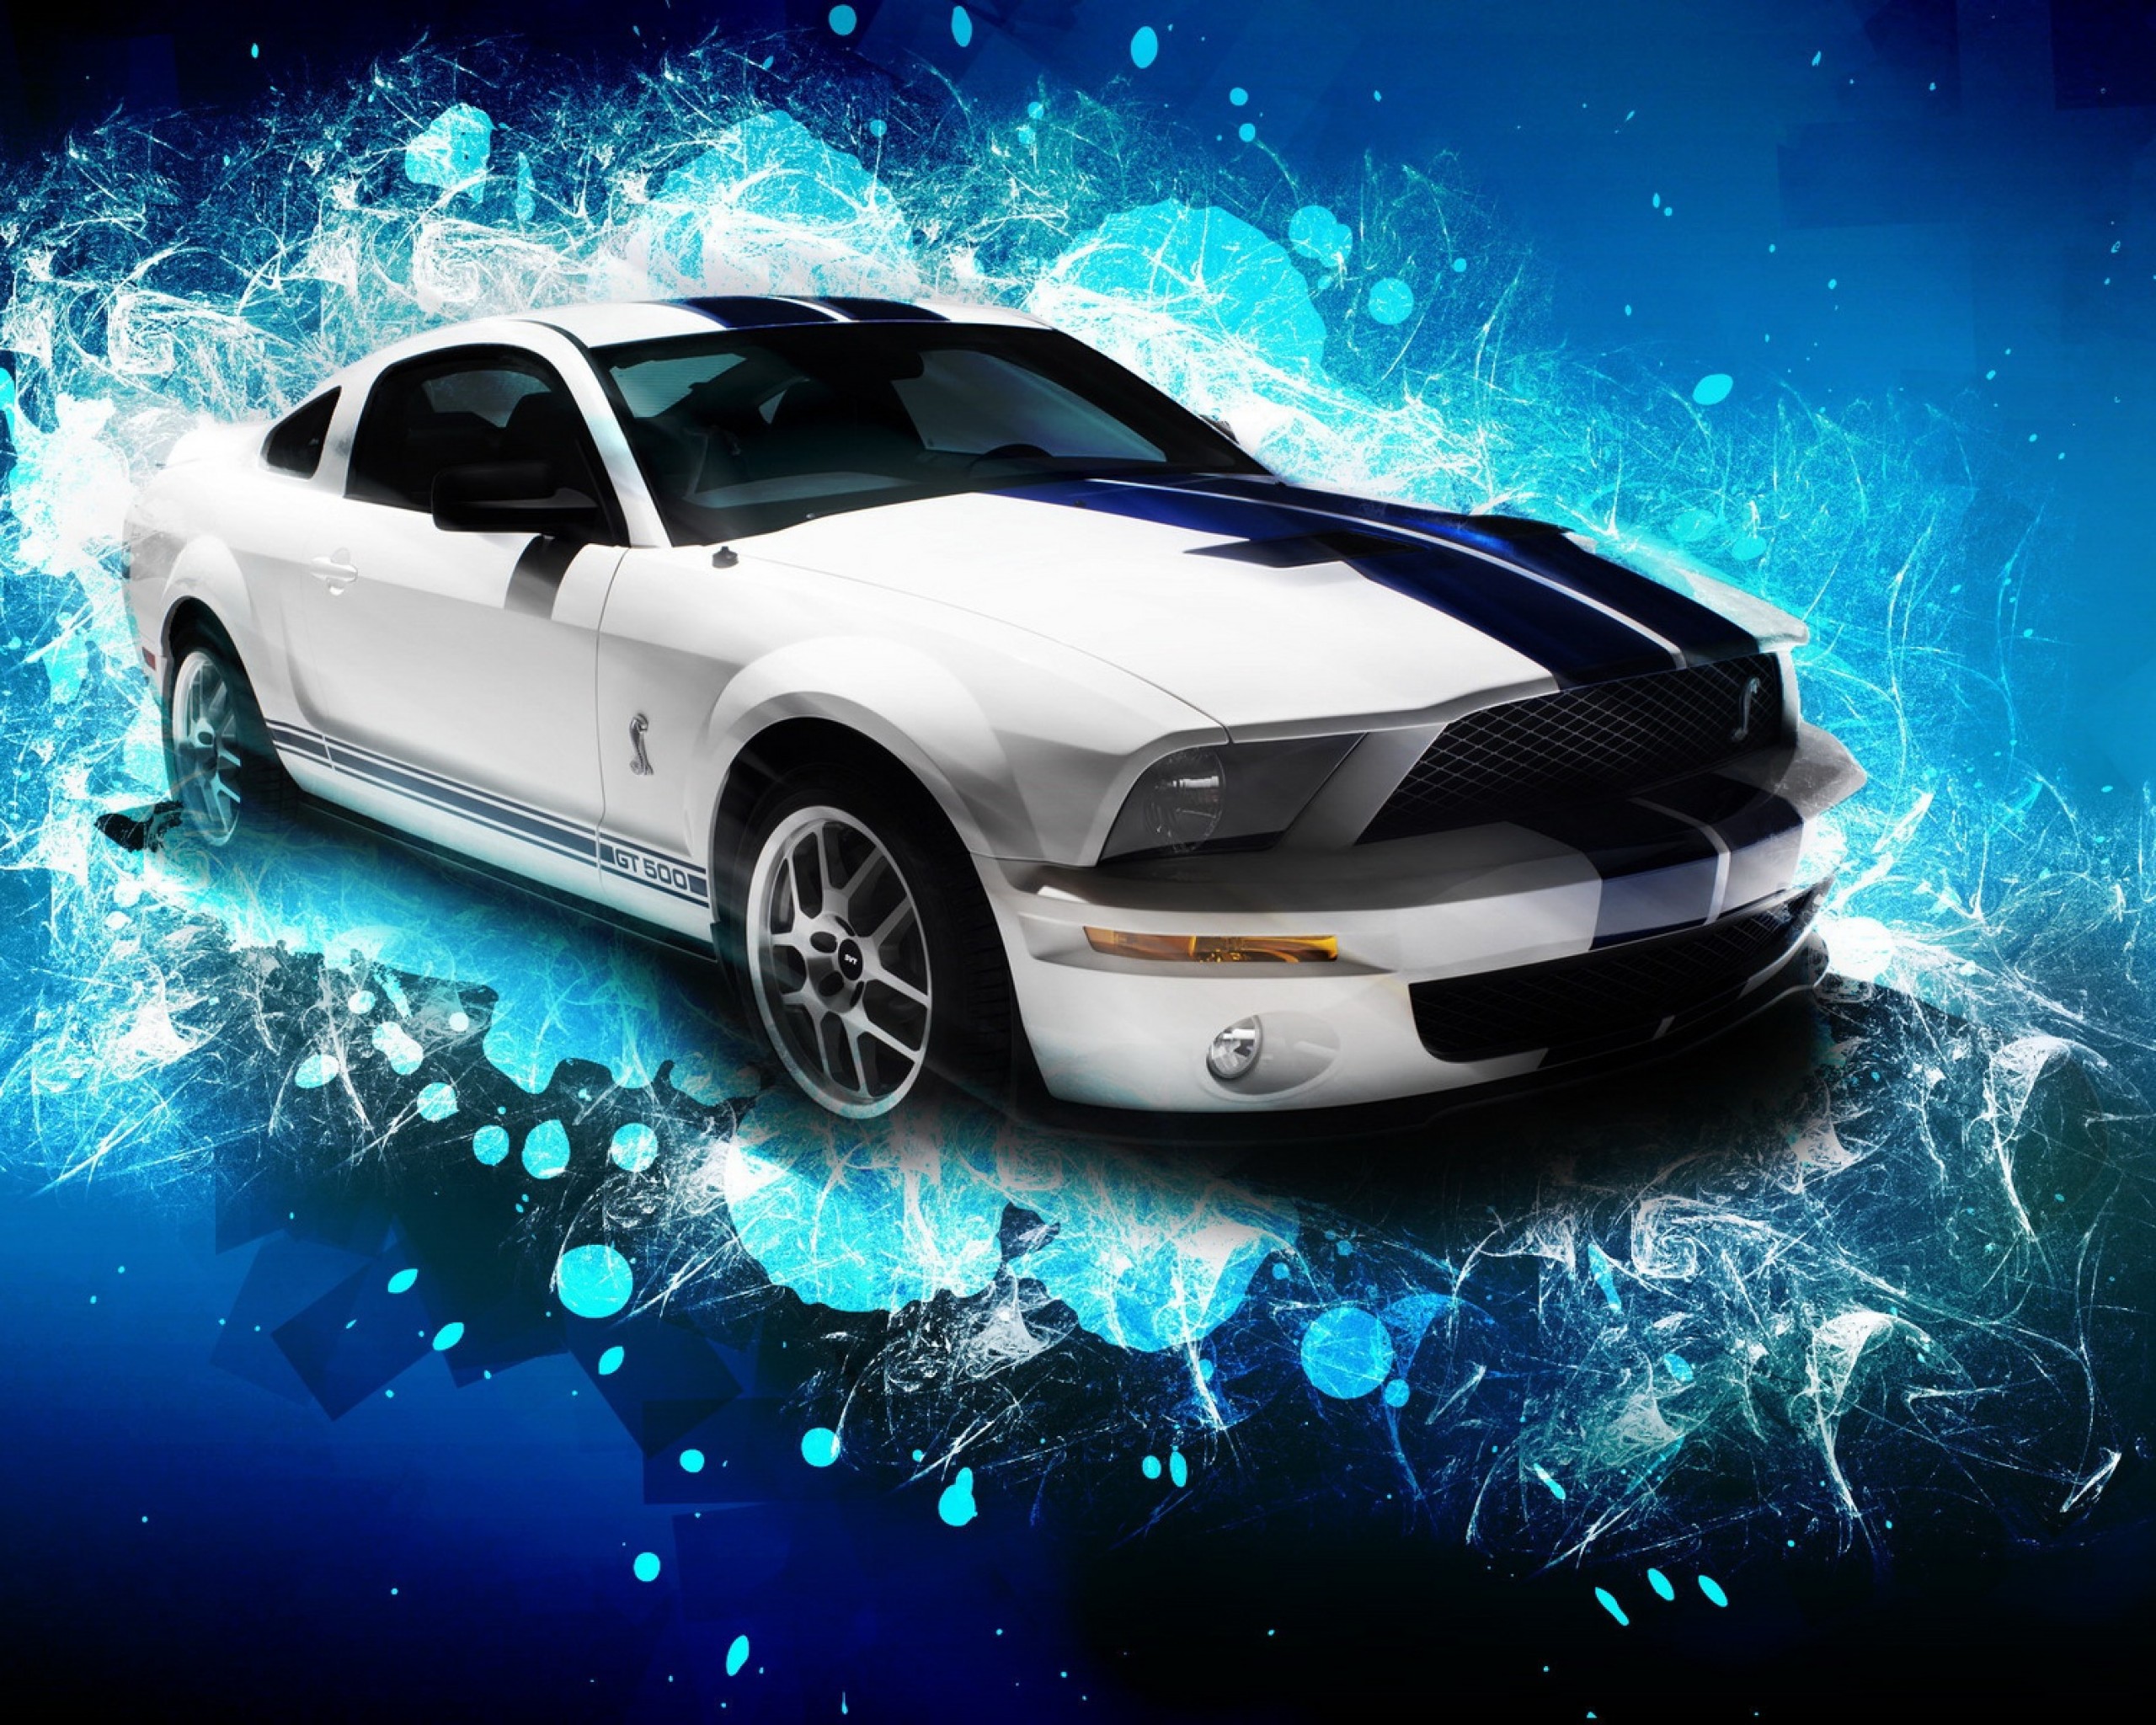 Ford Mustang Shelby Gt500 Desktop Wallpaper In High Resolution At Cars